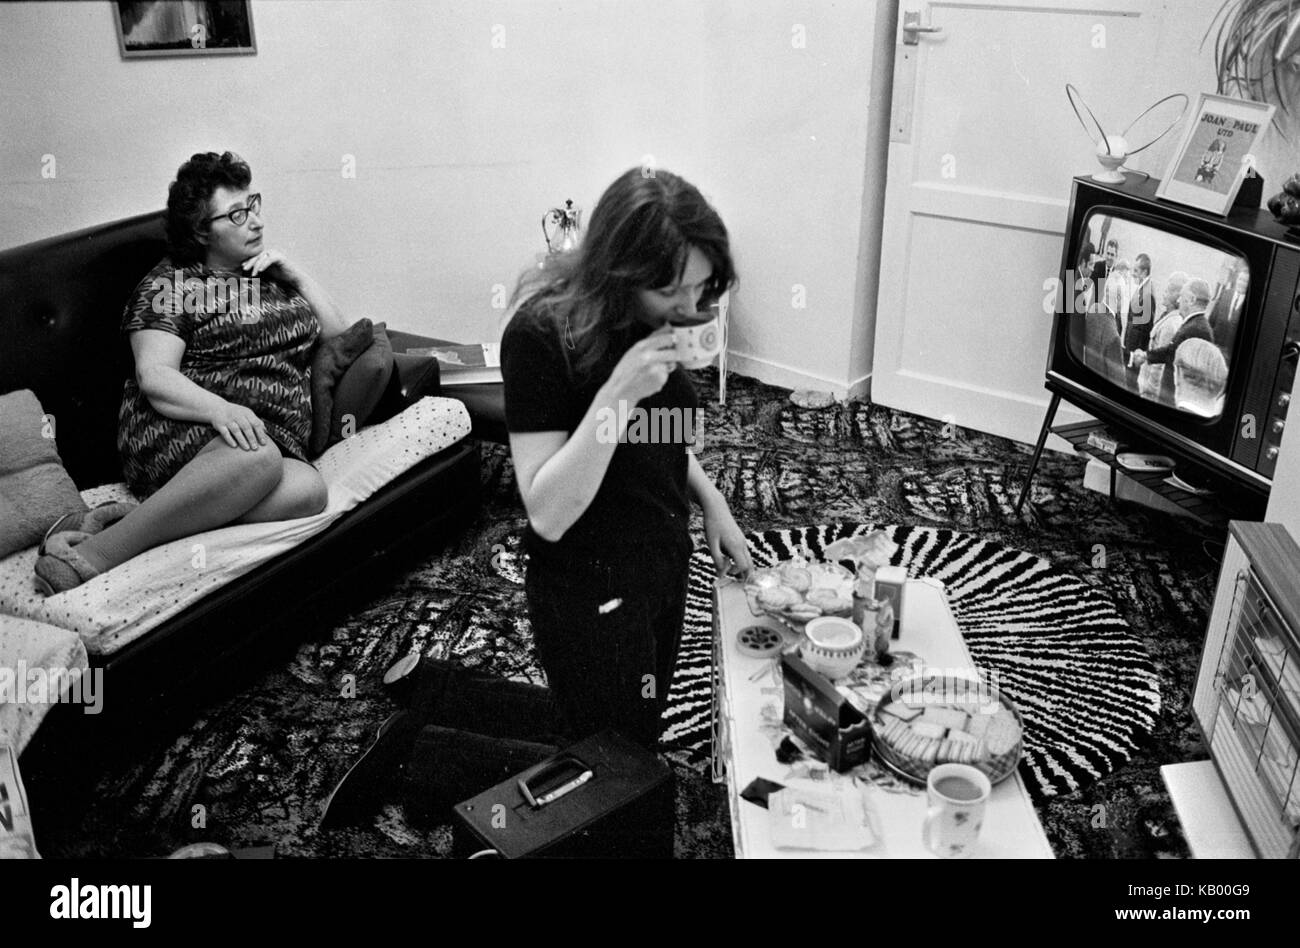 Family at home 1970s in living room interior watching TV television.  They are watching the BBC television news Presidents Nixon and his wife Pat Nixon are meeting and greeting. Note the butterfly television aerial on the top of the TV set. The home made card reads 'Joan Paul UTD.' After Eight chocolates and a plate and tin biscuits. HOMER SYKES Stock Photo